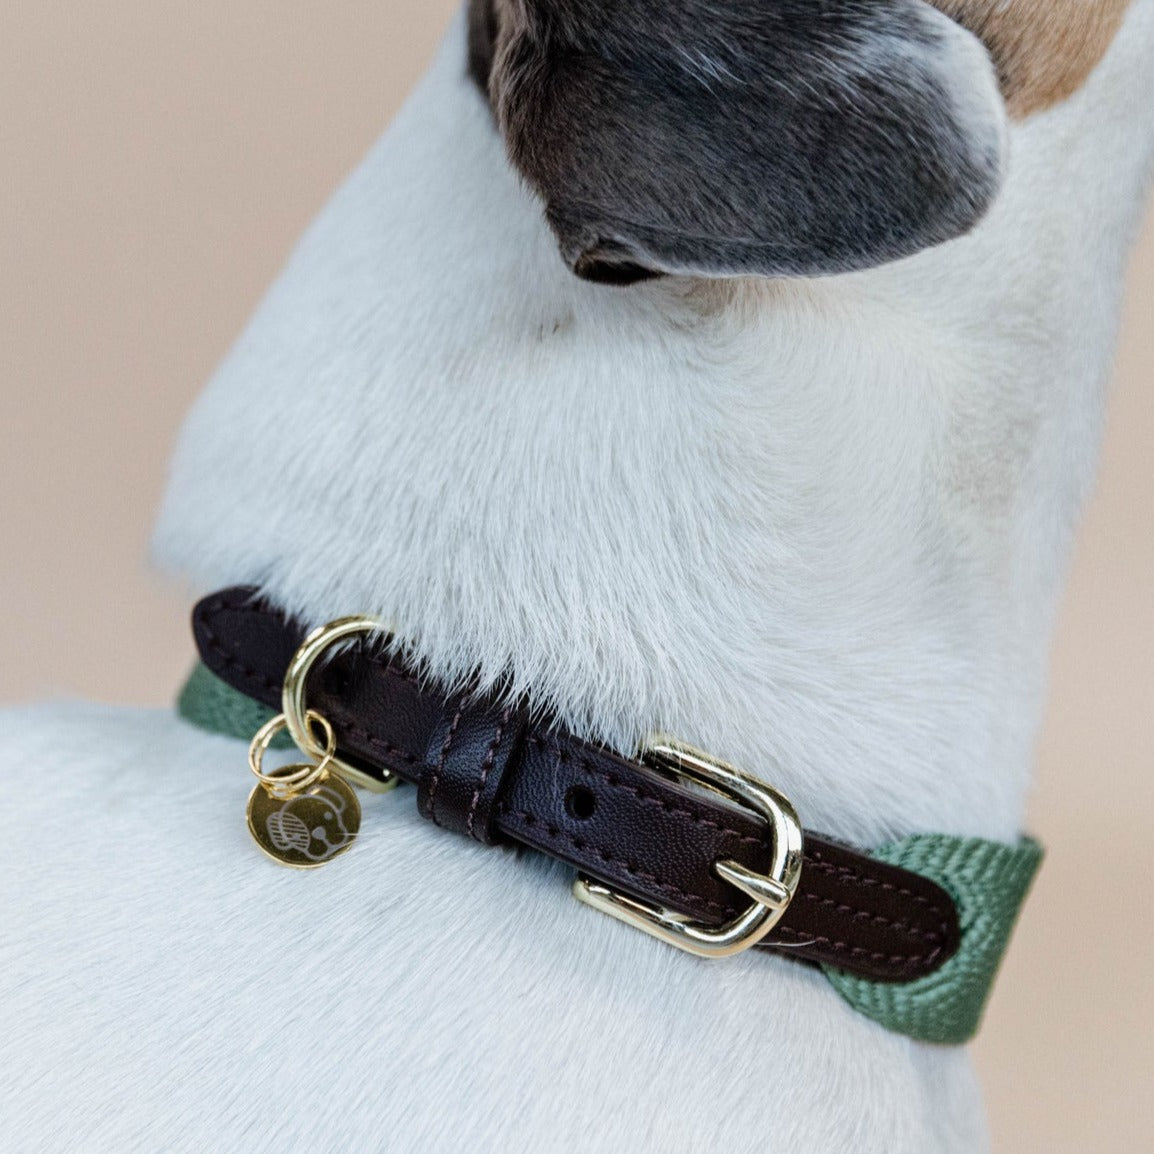 Collier chien large Jaquard Kentucky - vert olive